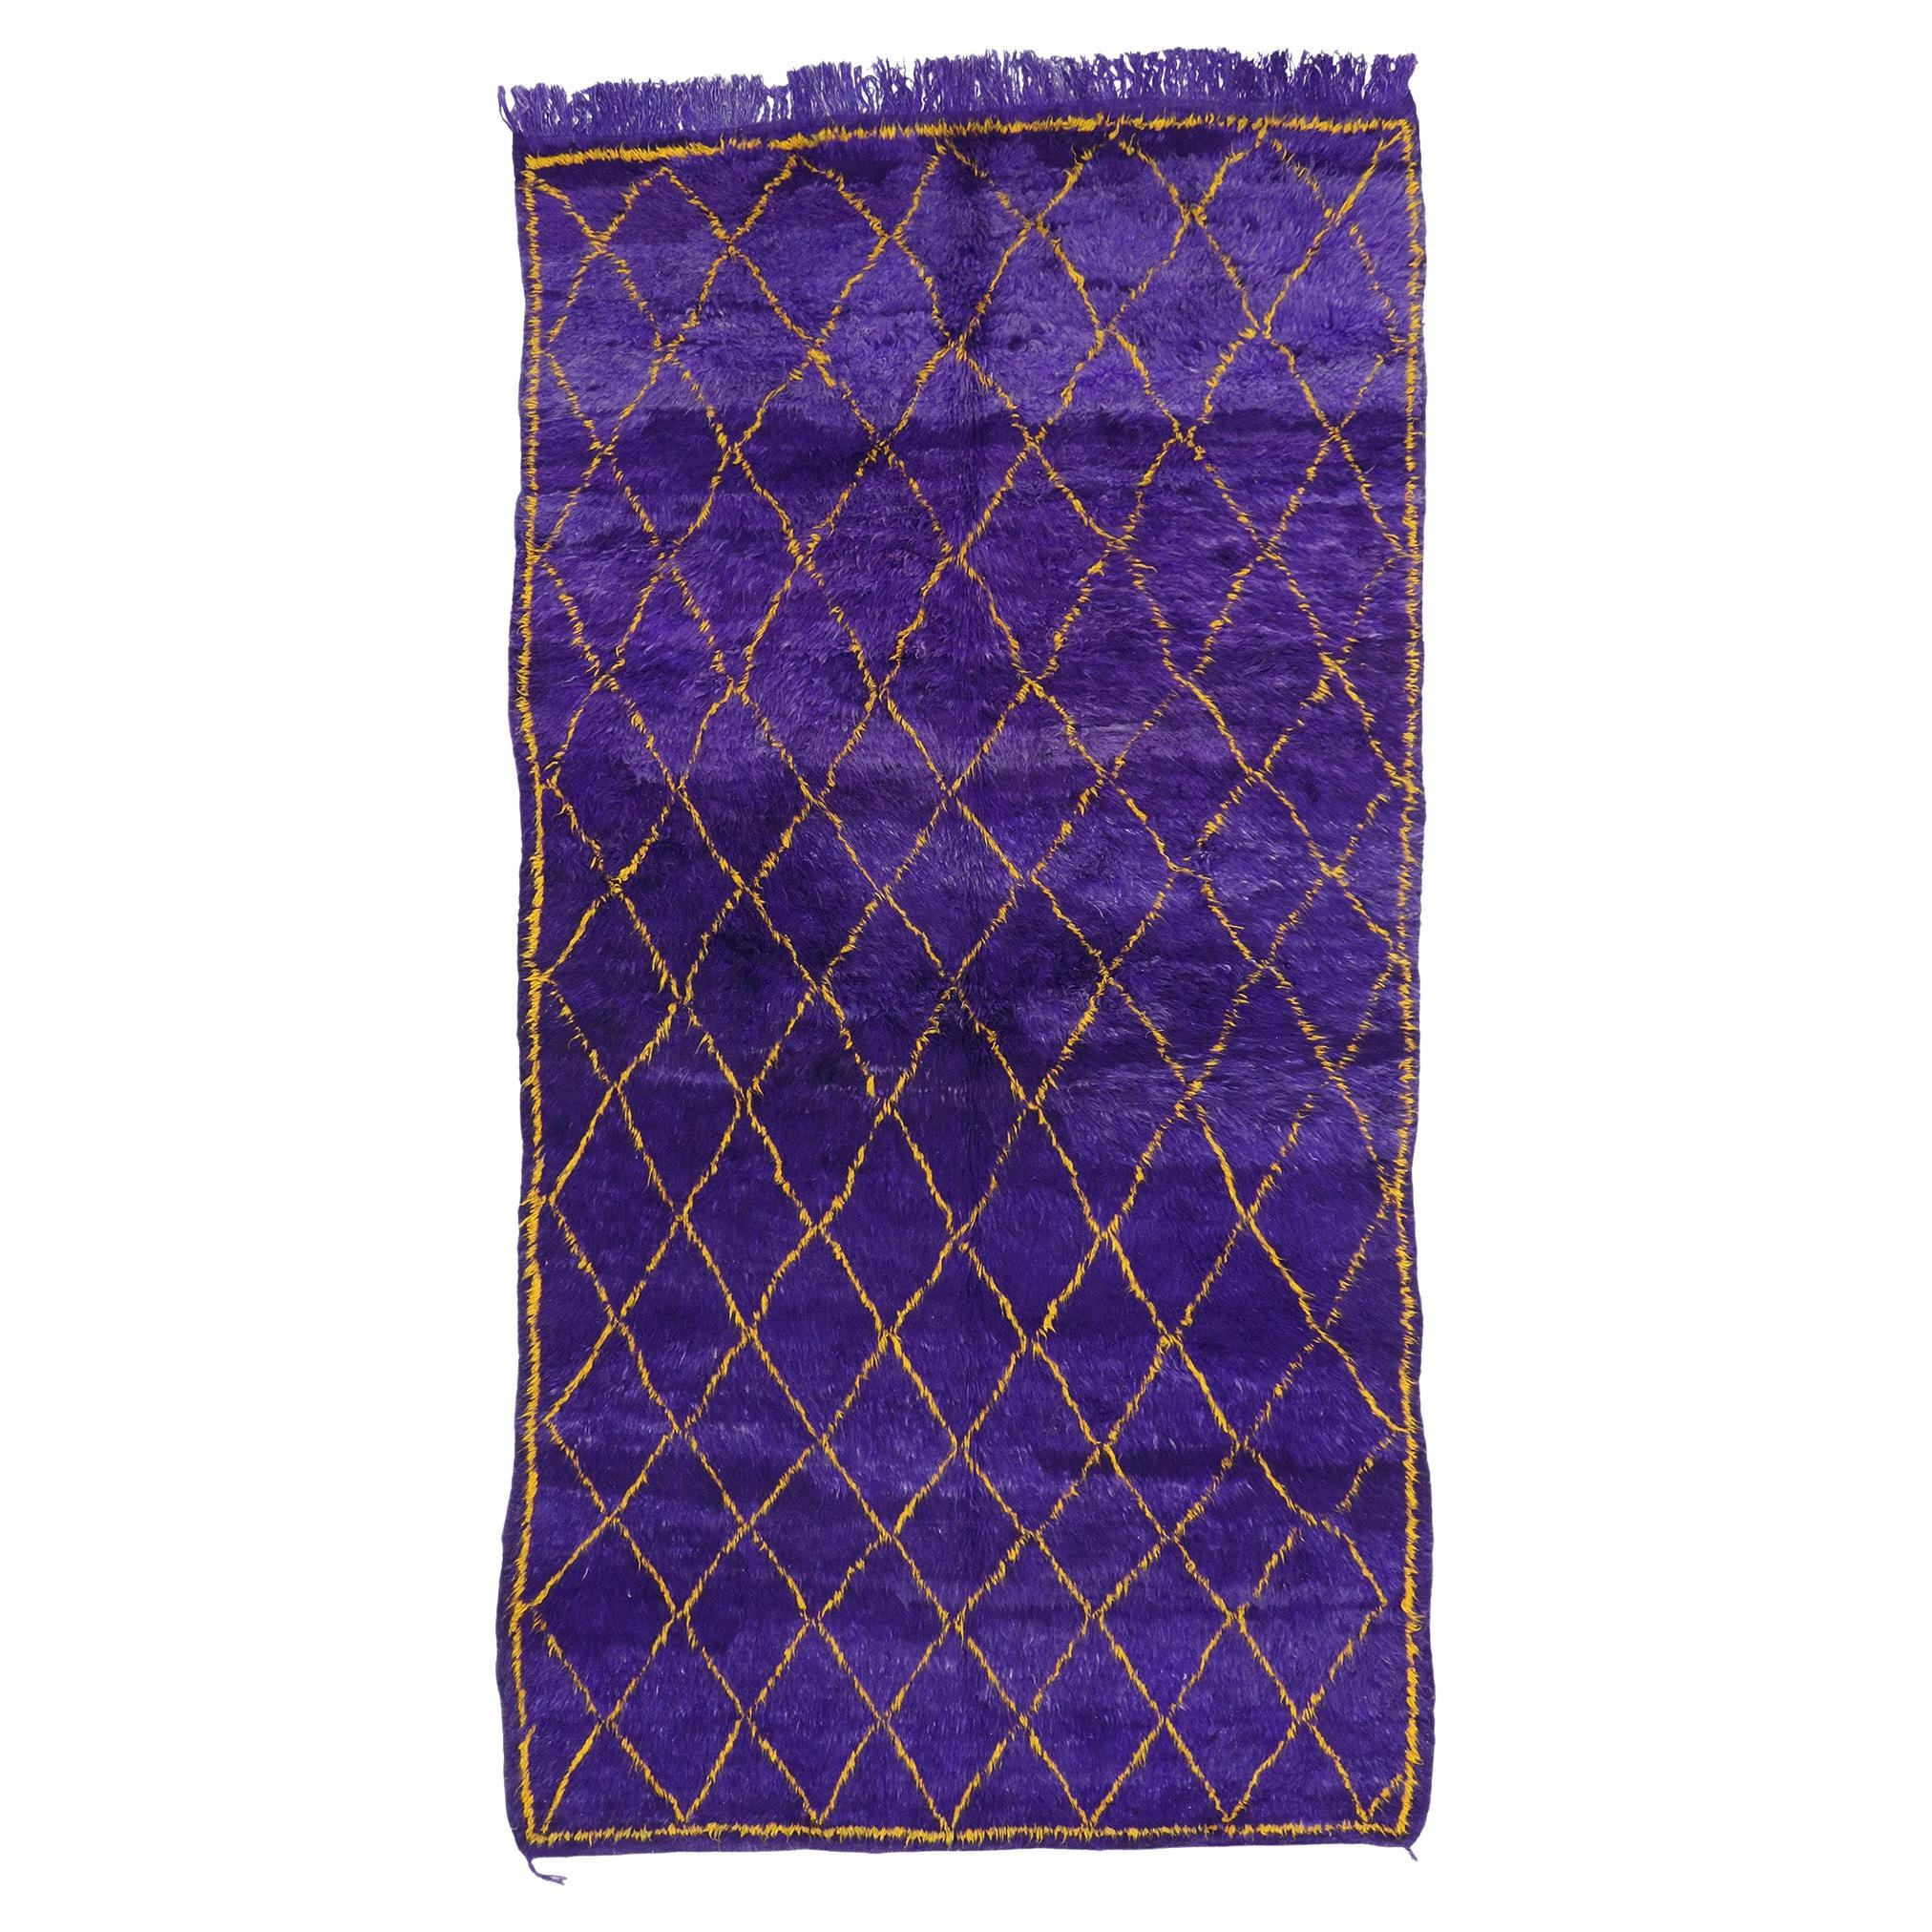 Vintage Purple Moroccan Beni Ourain Rug, Midcentury Modern Meets Boho Chic For Sale